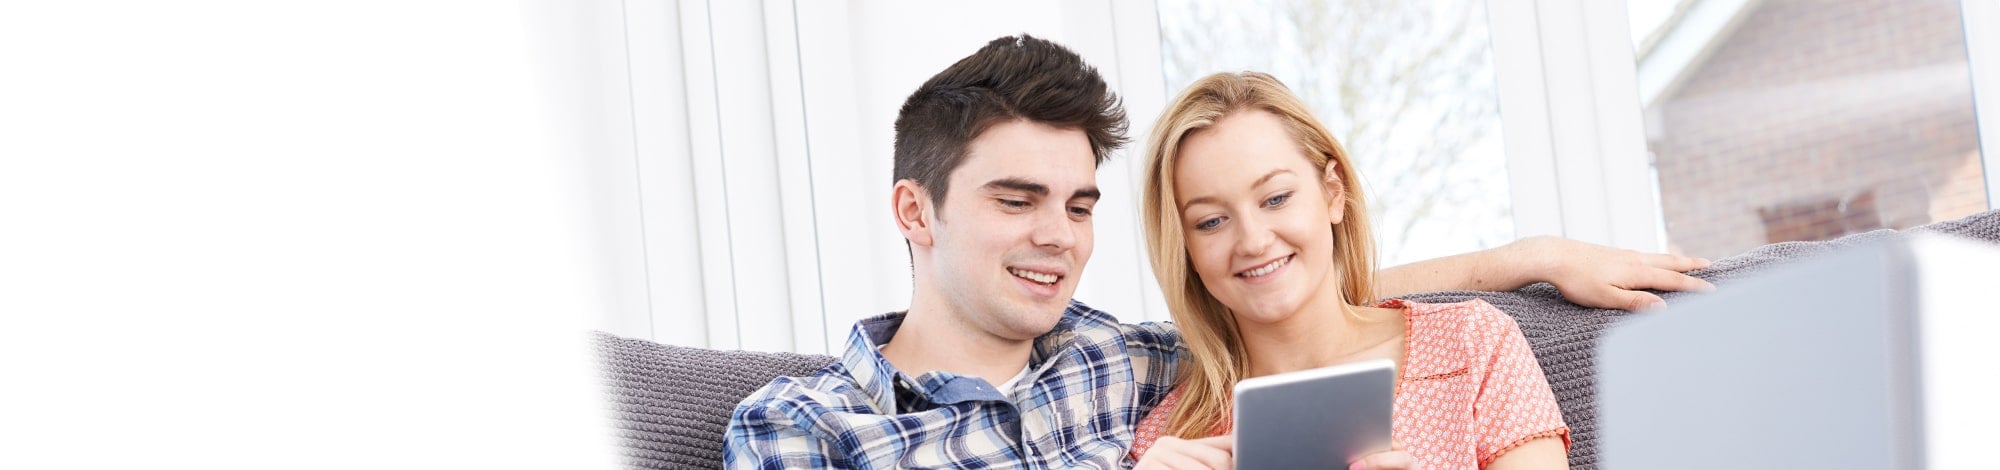 Couple looking Online via a Phone for Rental Property Viewings